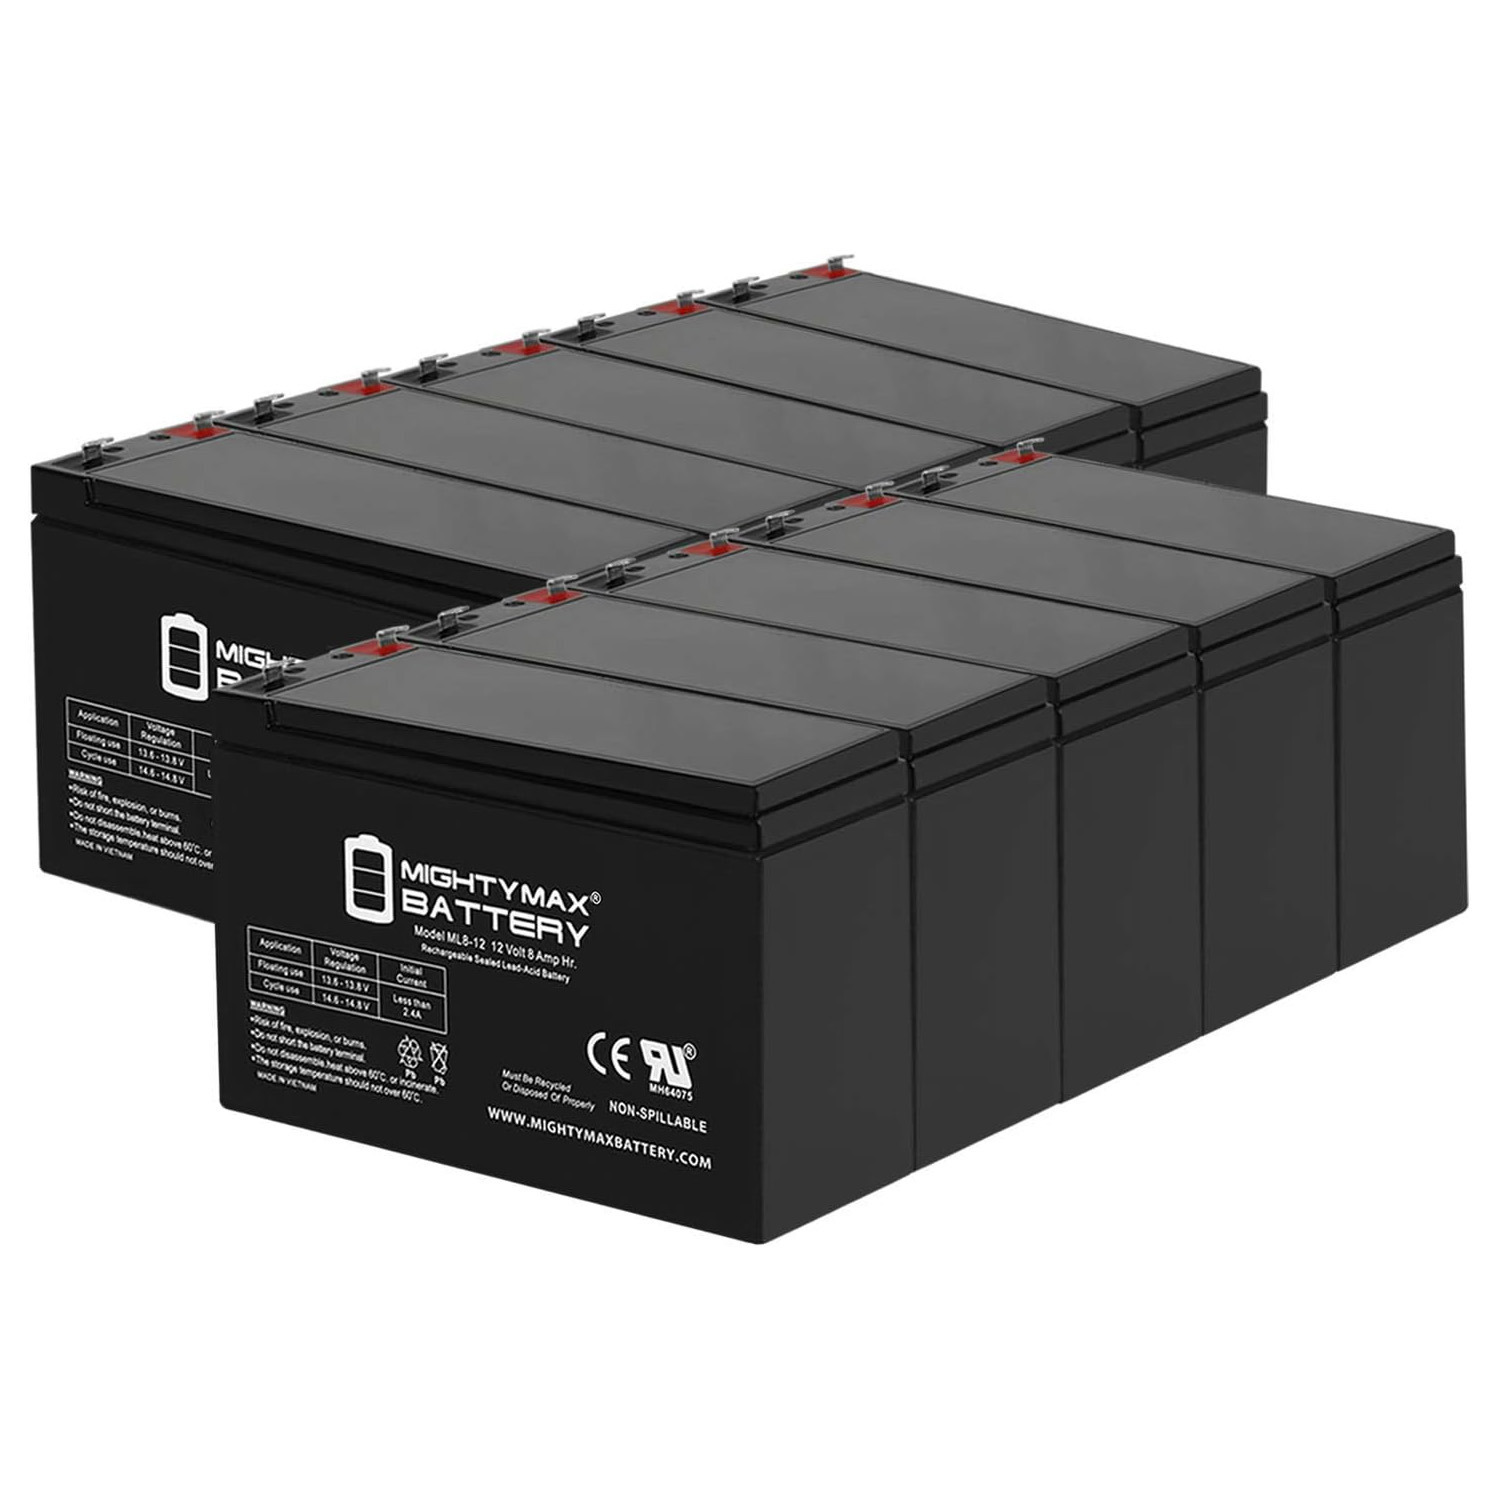 12V 8Ah Battery Replacement for Sola B510-600-U, B510-900-A - 10 Pack